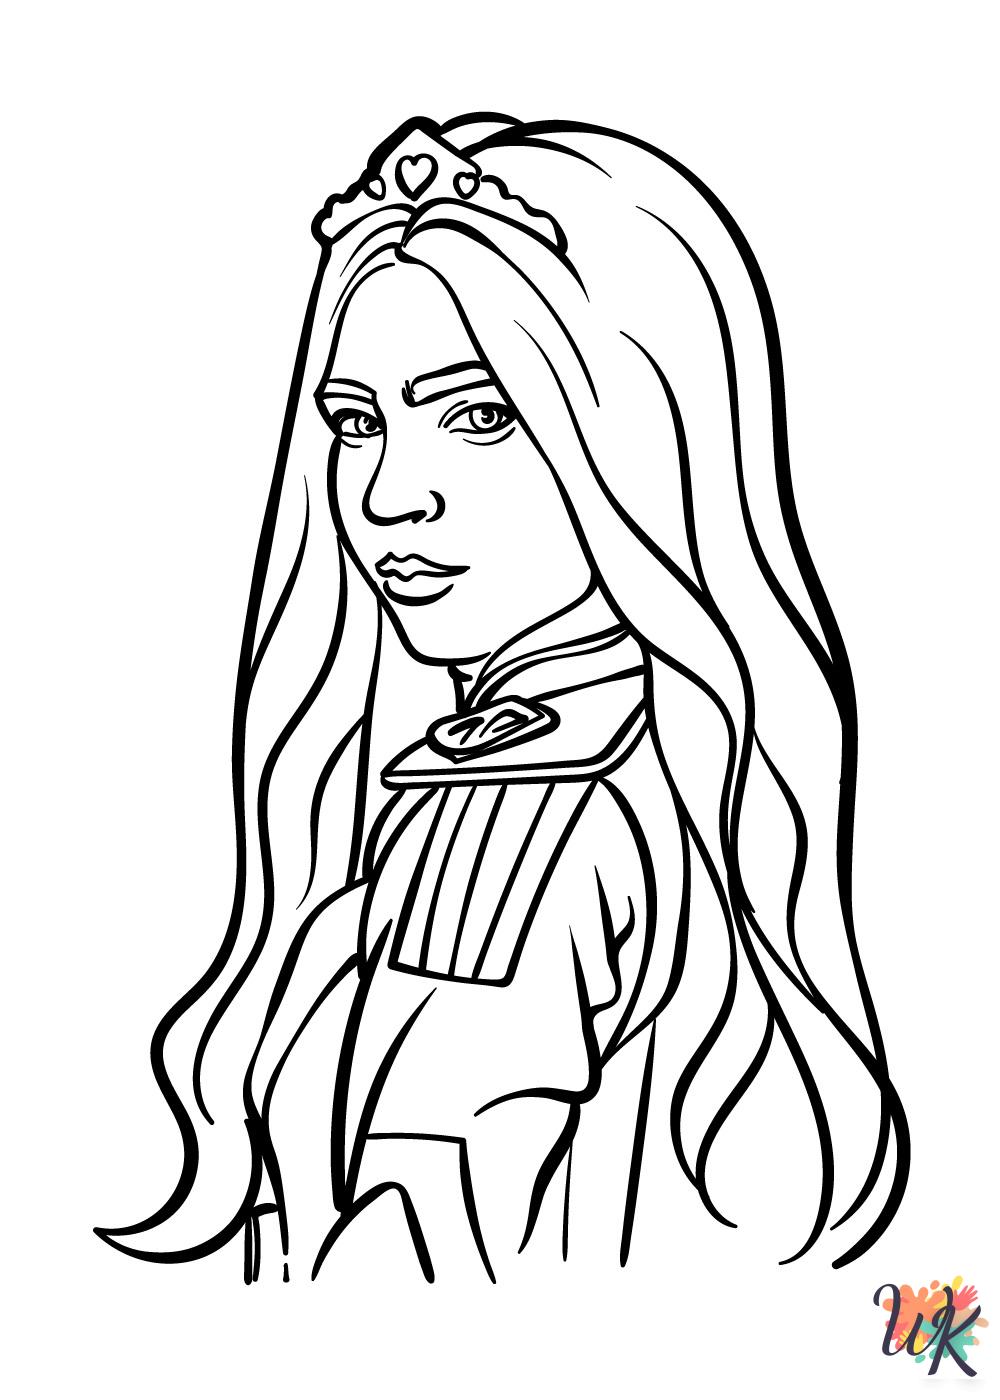 Descendants 2 themed coloring pages